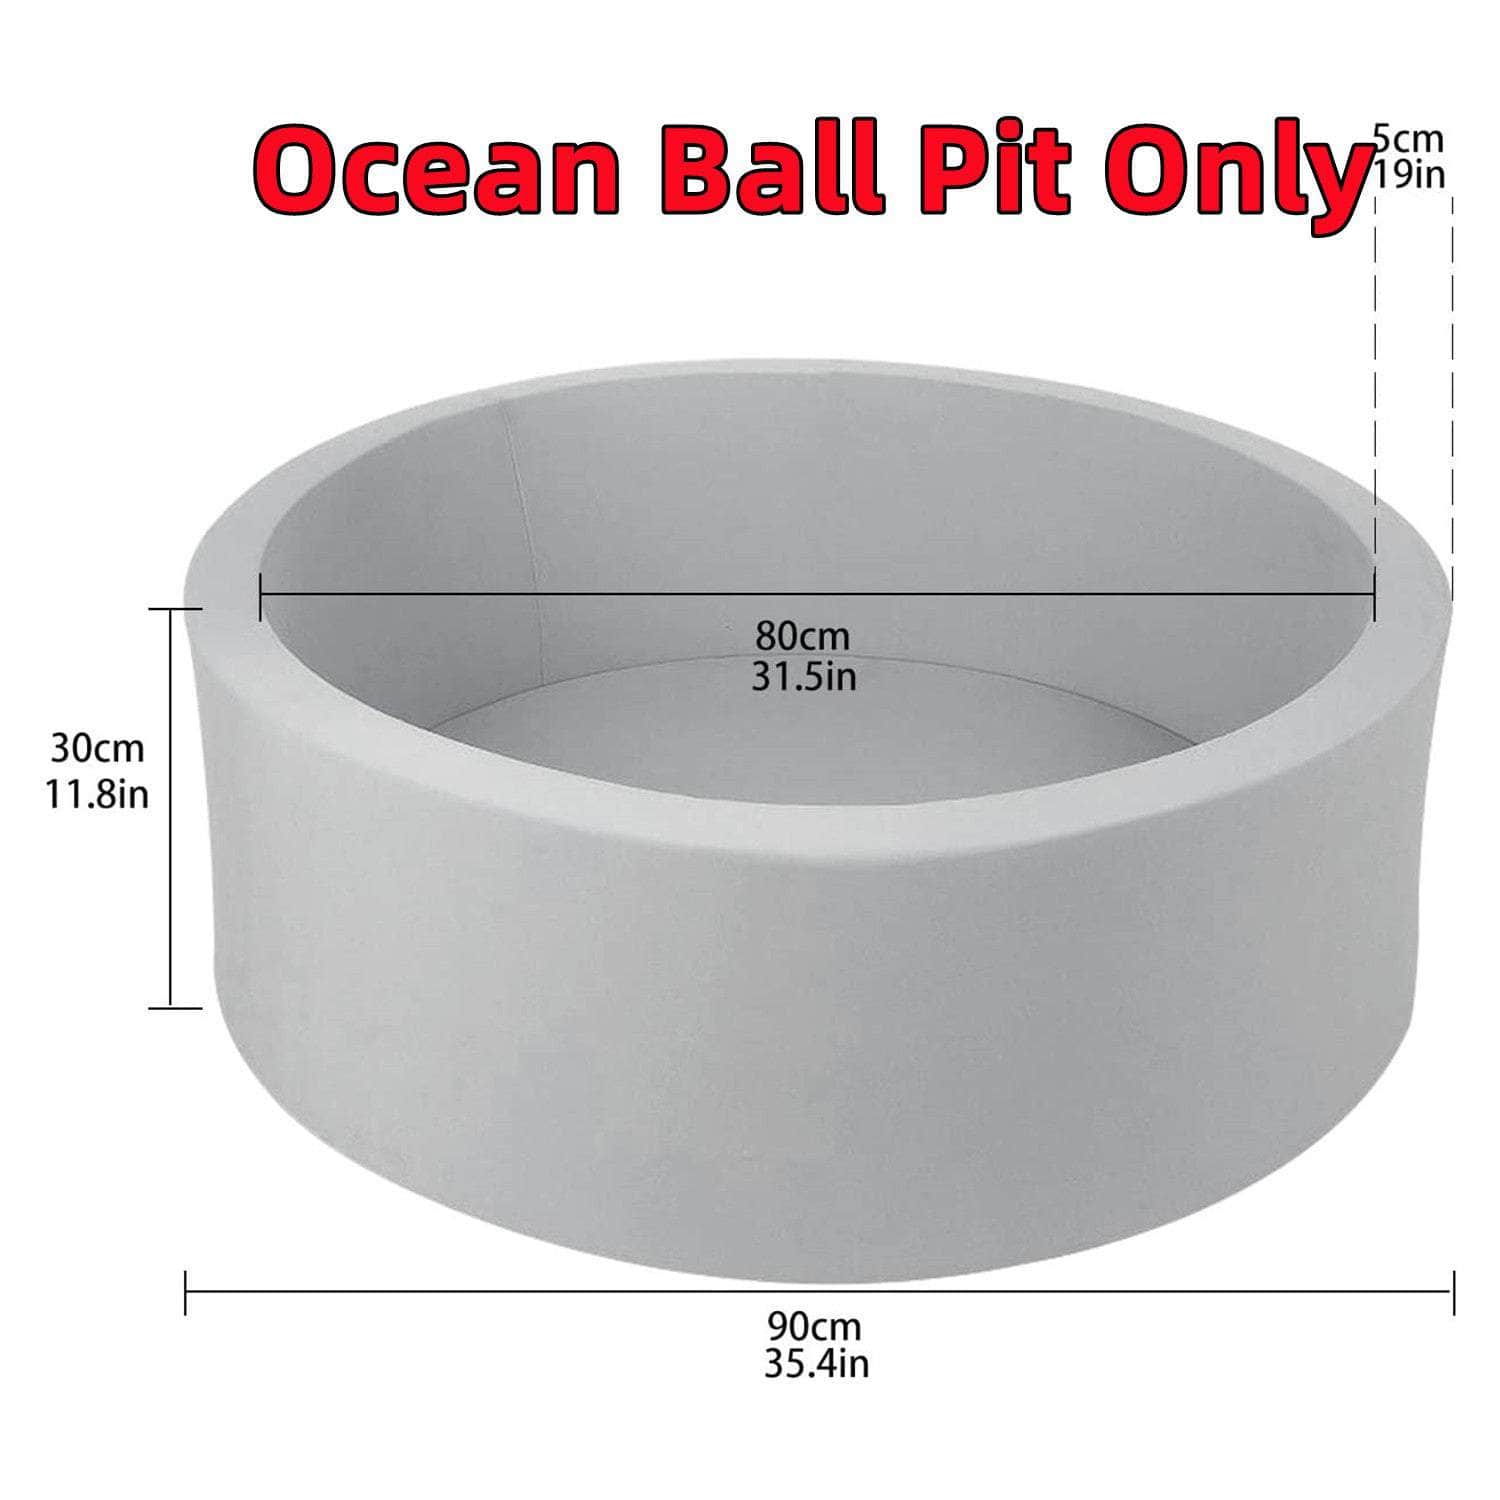 Soft Ocean Ball Toy for Kids' Foam Pool Play